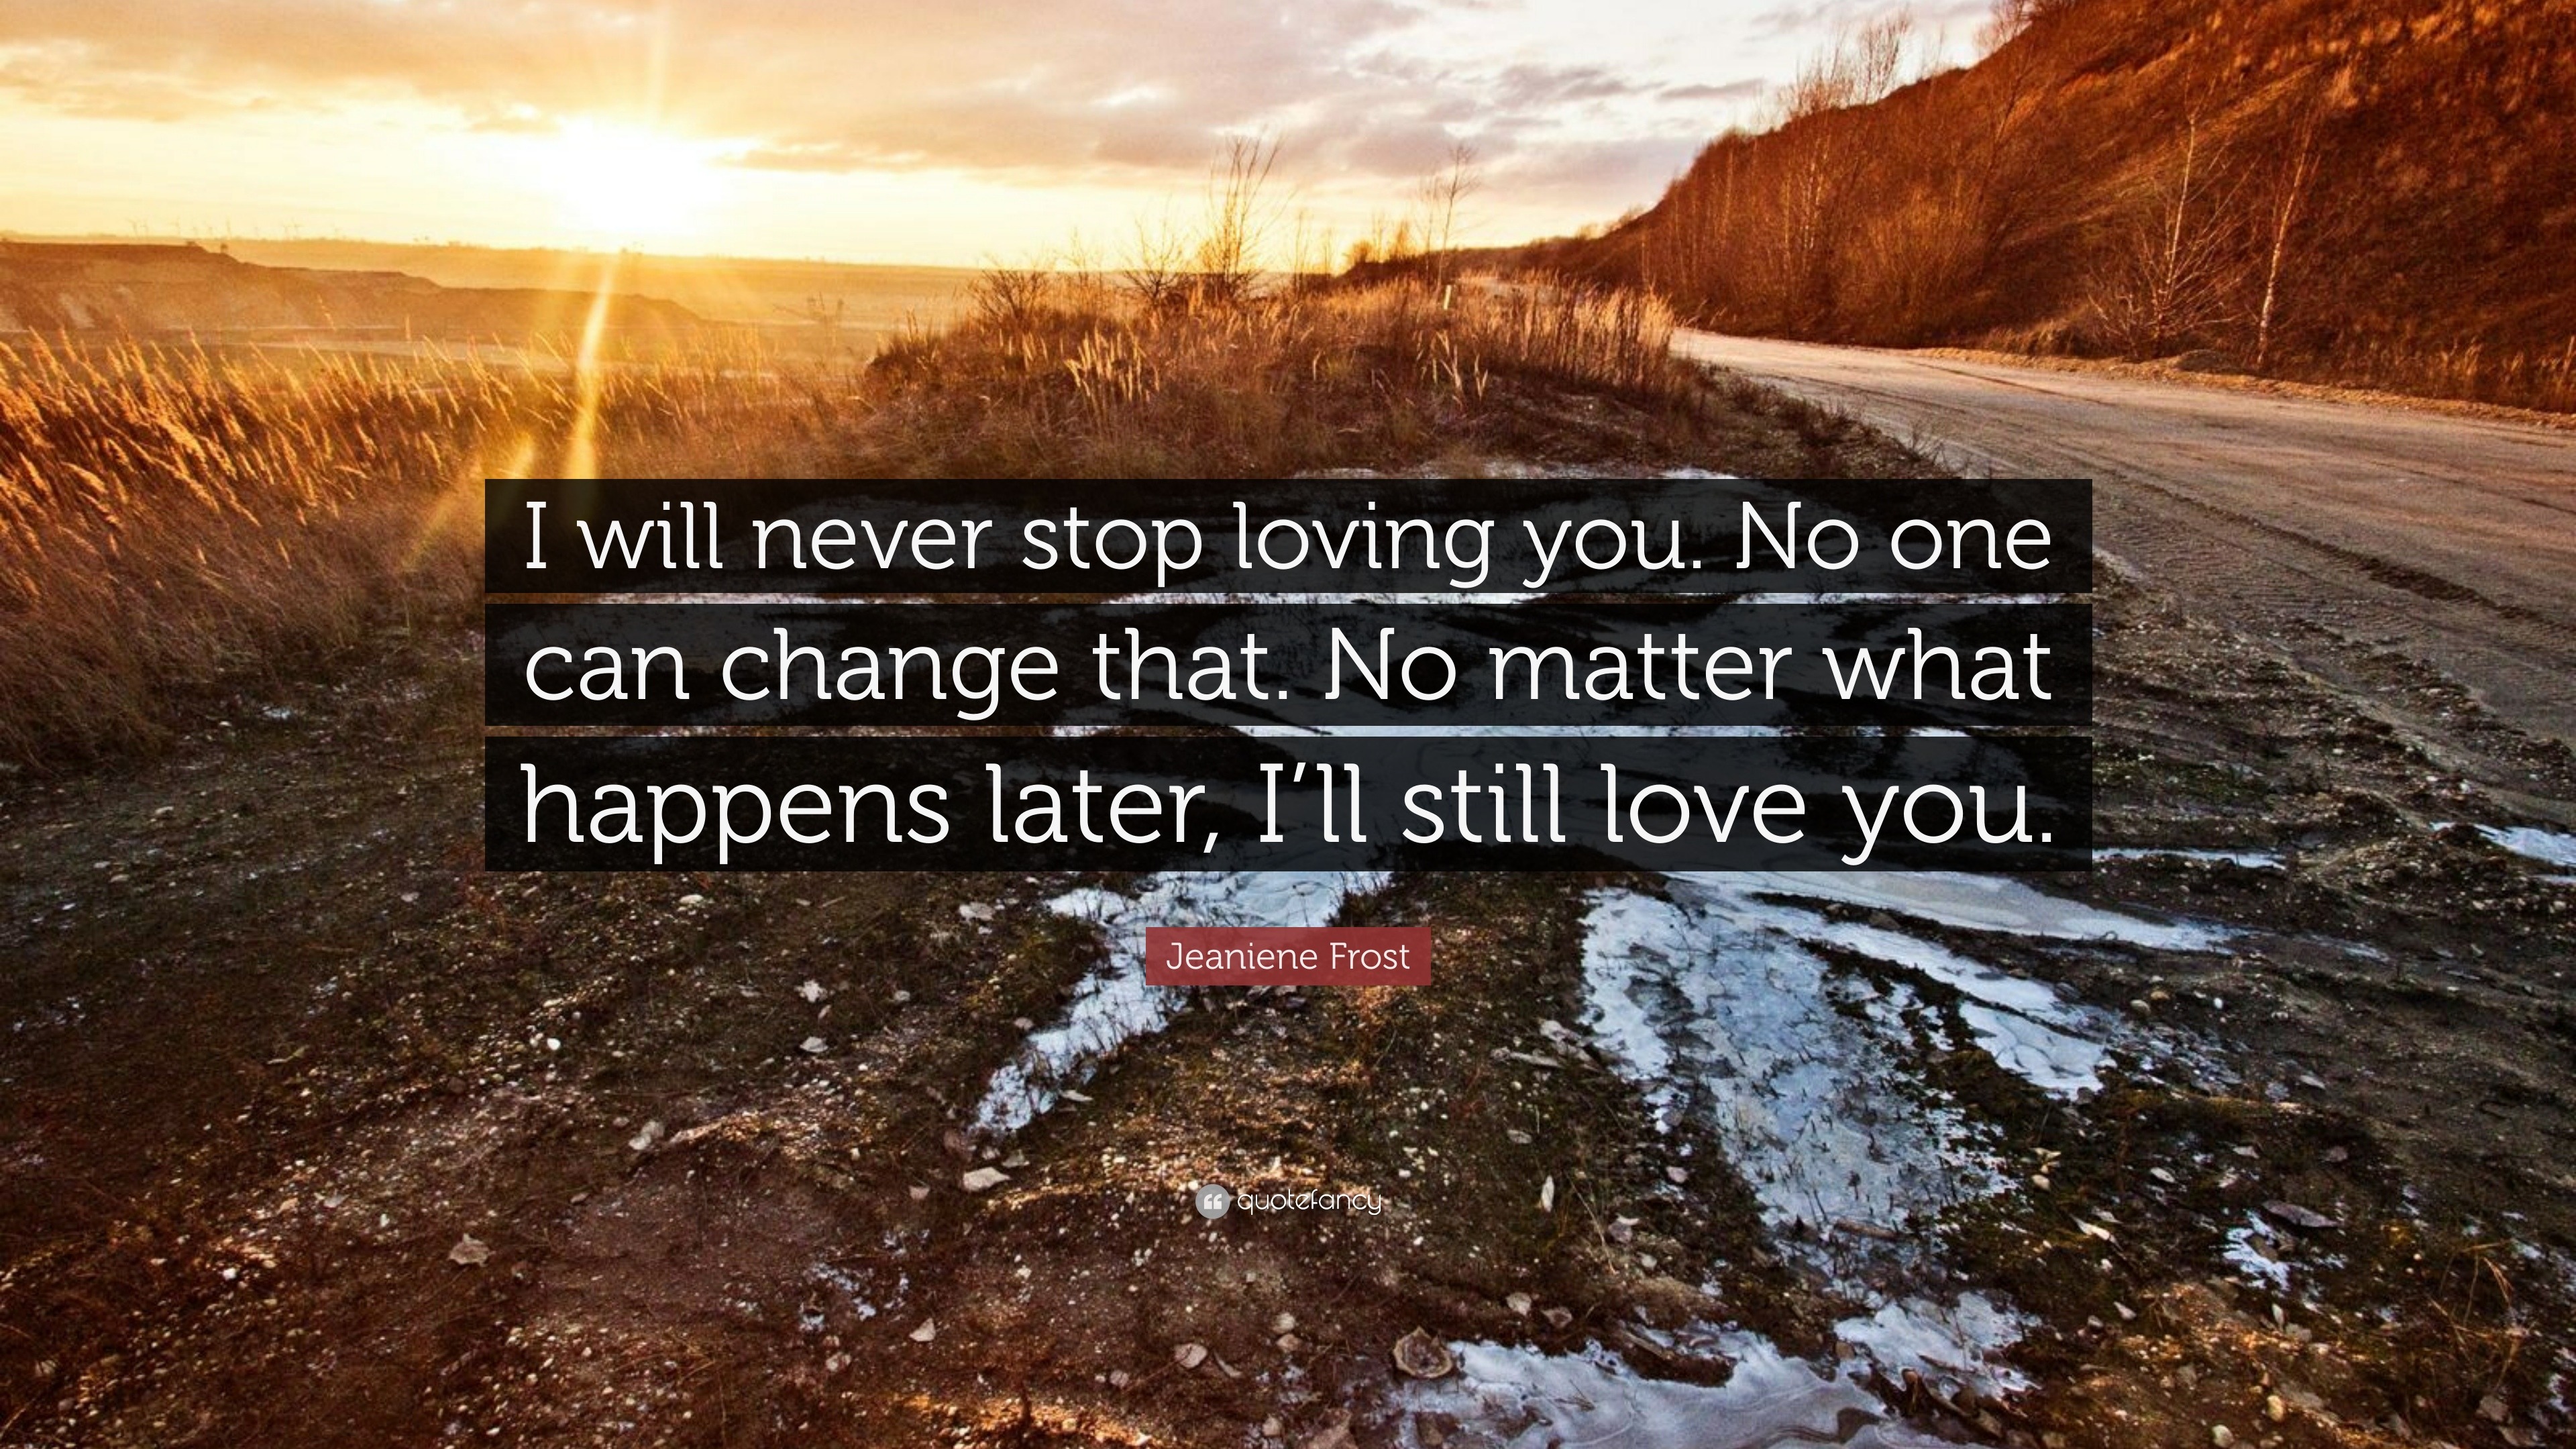 Jeaniene Frost Quote “I will never stop loving you No one can change